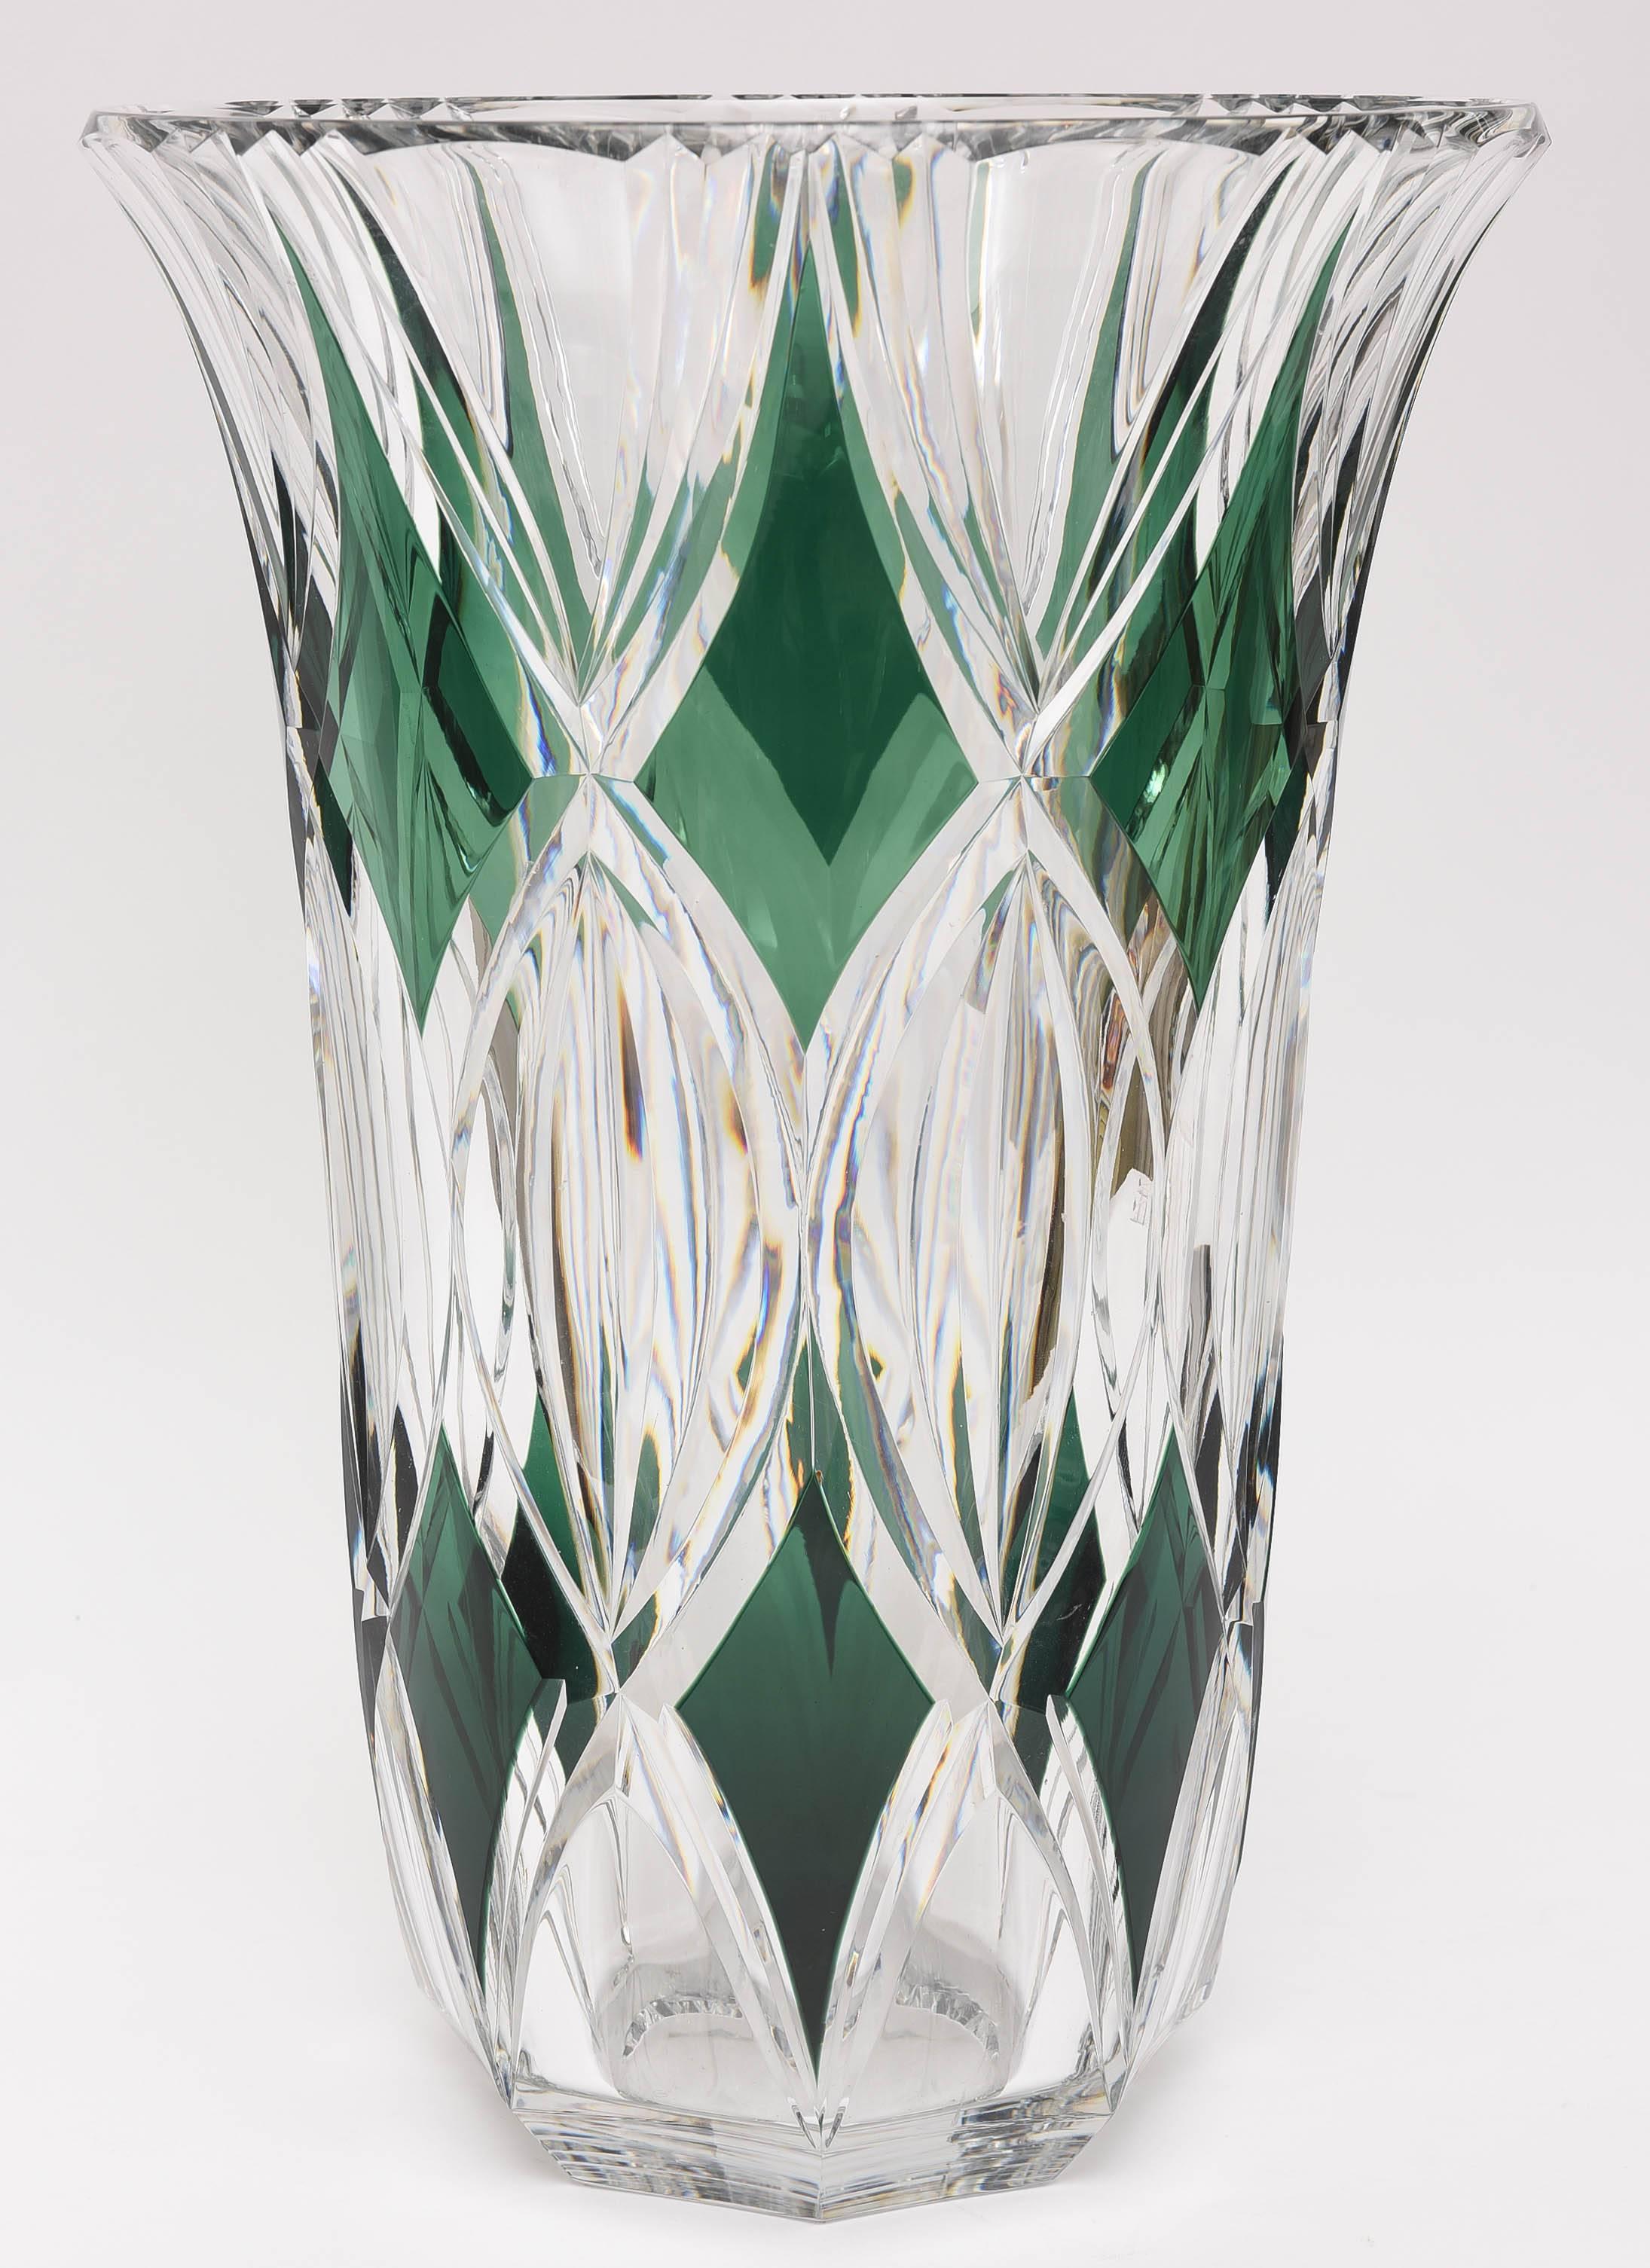 An exceptional piece of Vintage glass from one of our favorite makers: Val Saint Lambert. This monumental and very heavy piece features a modified cased emerald green diamond pattern in between elongated circles. Well proportioned and a nice flair